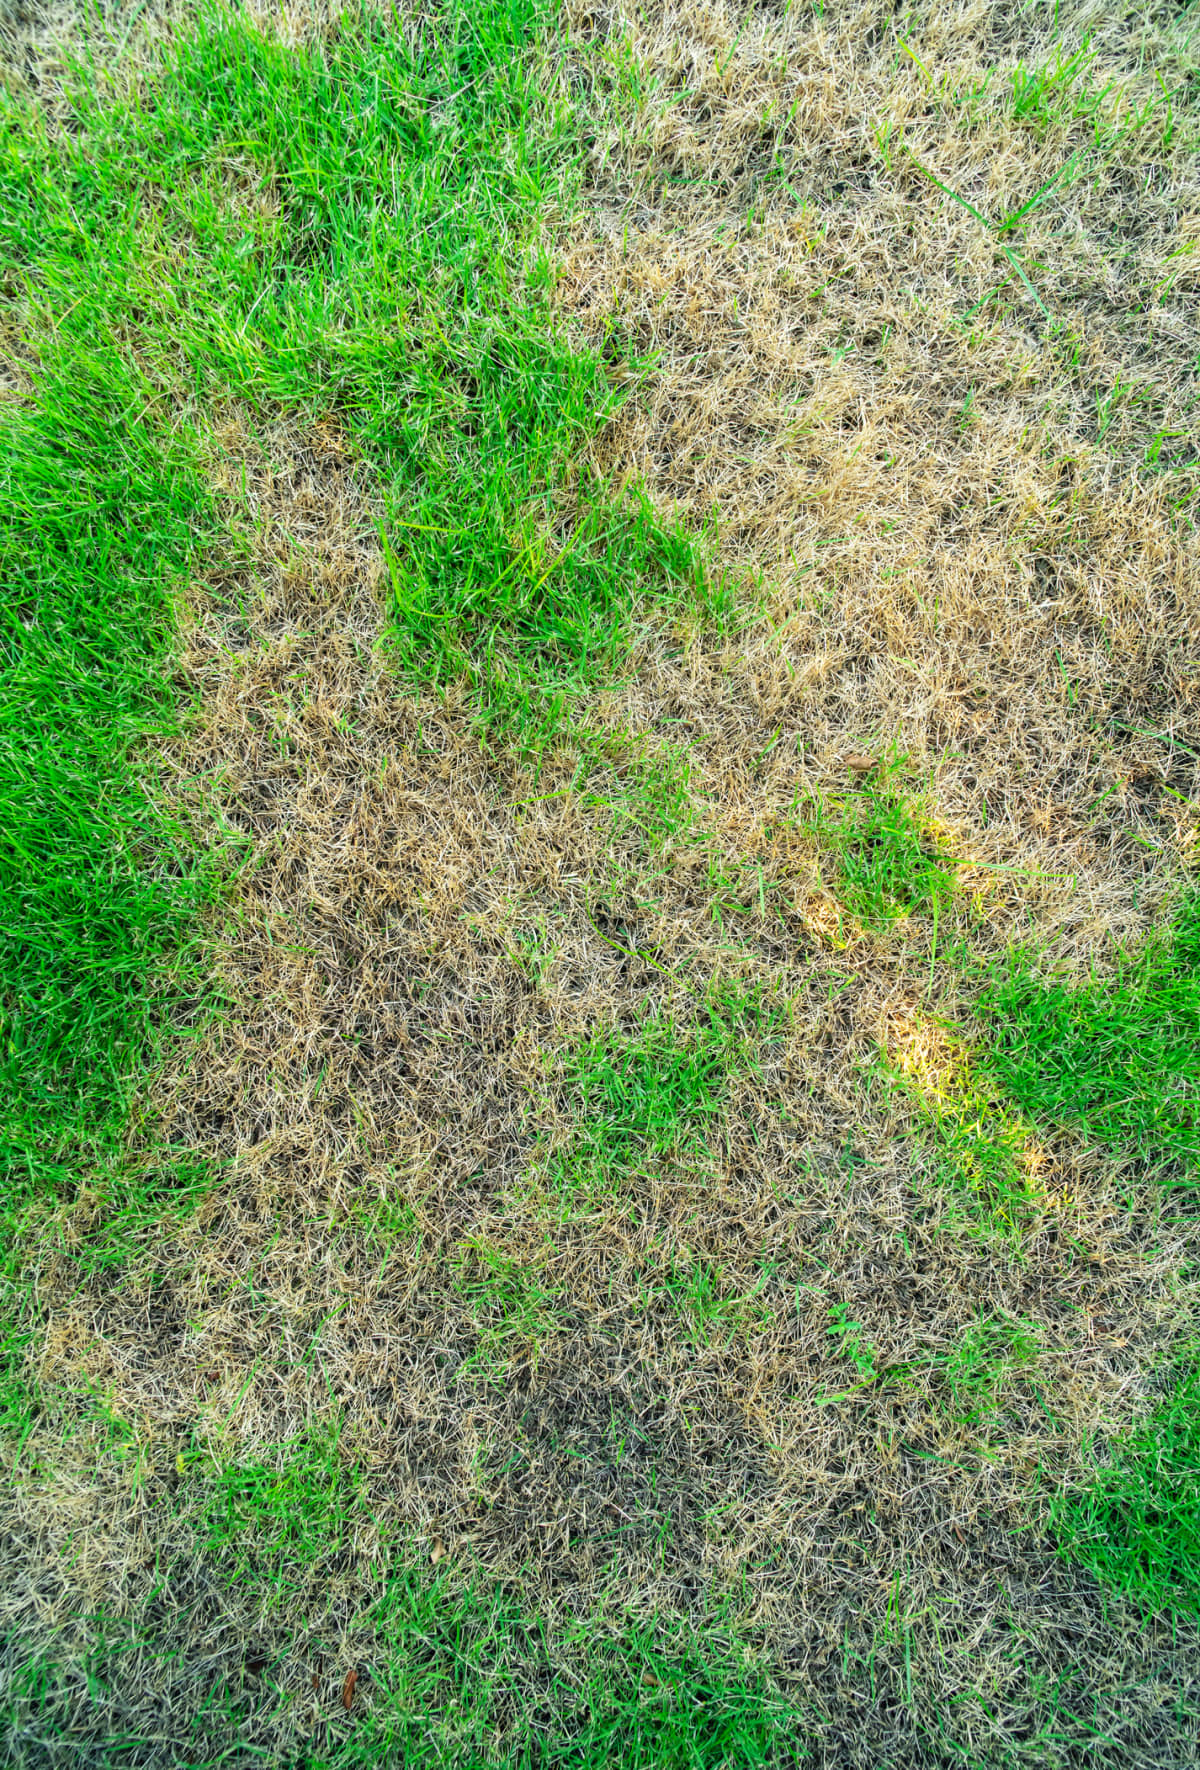 Lawn in bad condition with patchy yellow and brown grass